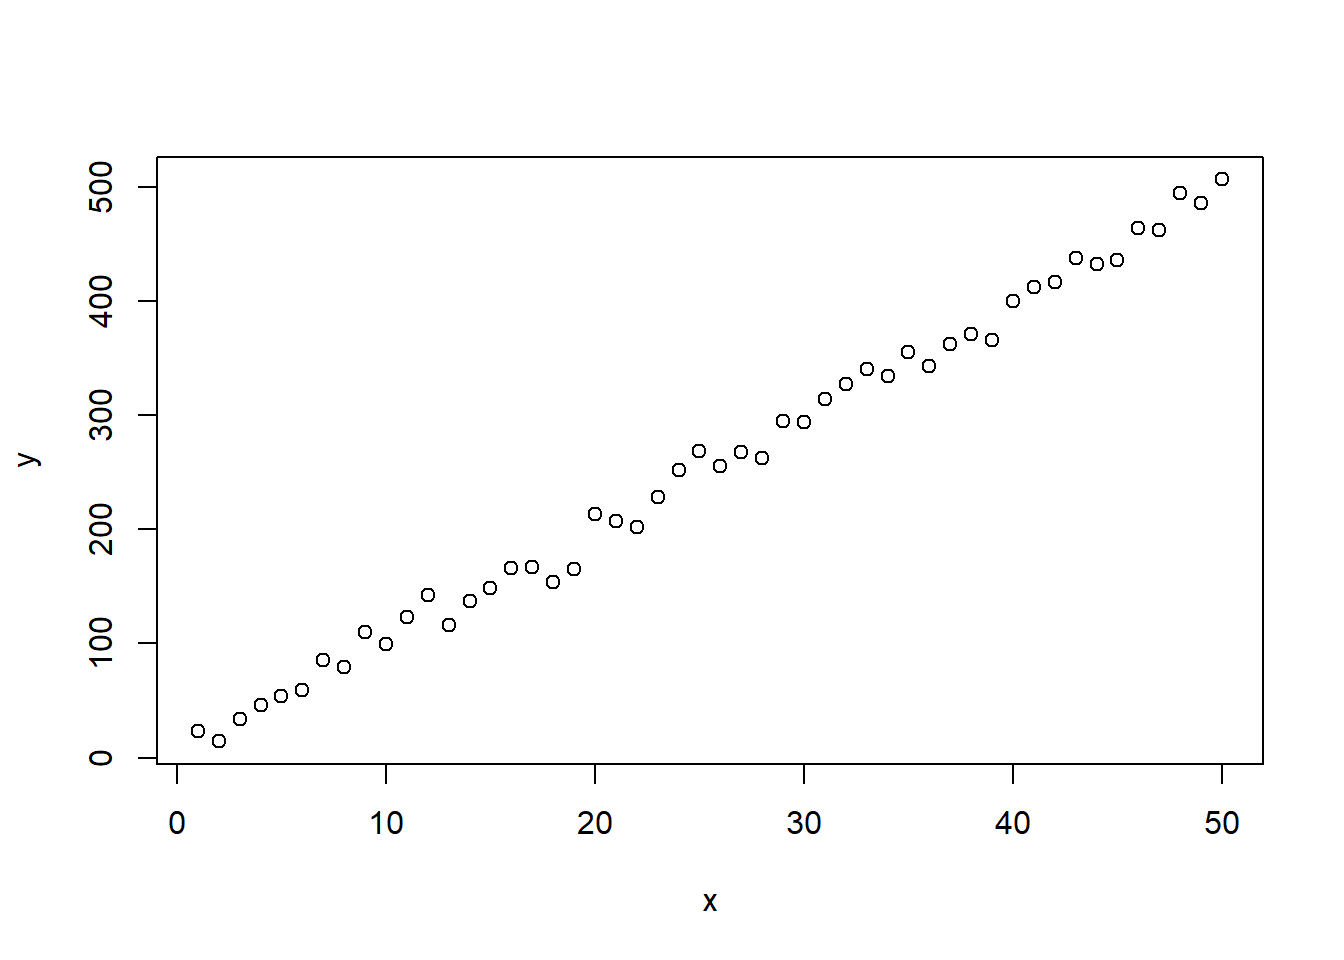 Simple plot of the 50 simulated data points.